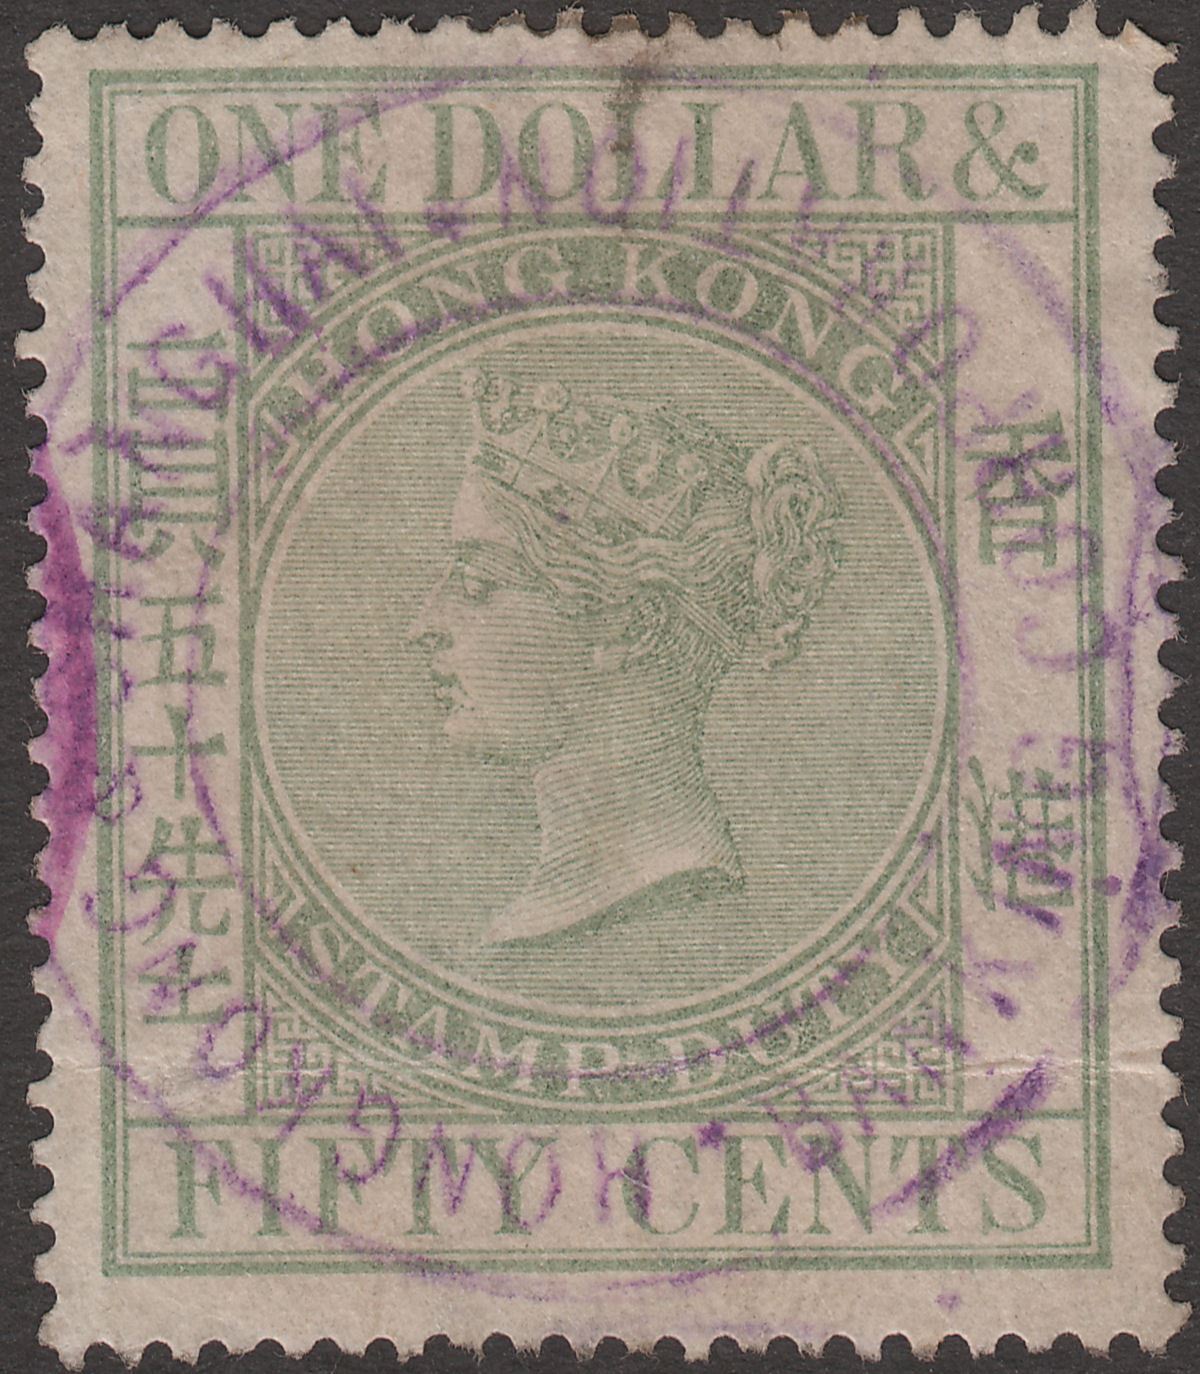 Hong Kong 1885 QV Revenue Stamp Duty $1.50 Green Used with crease Barefoot BF24